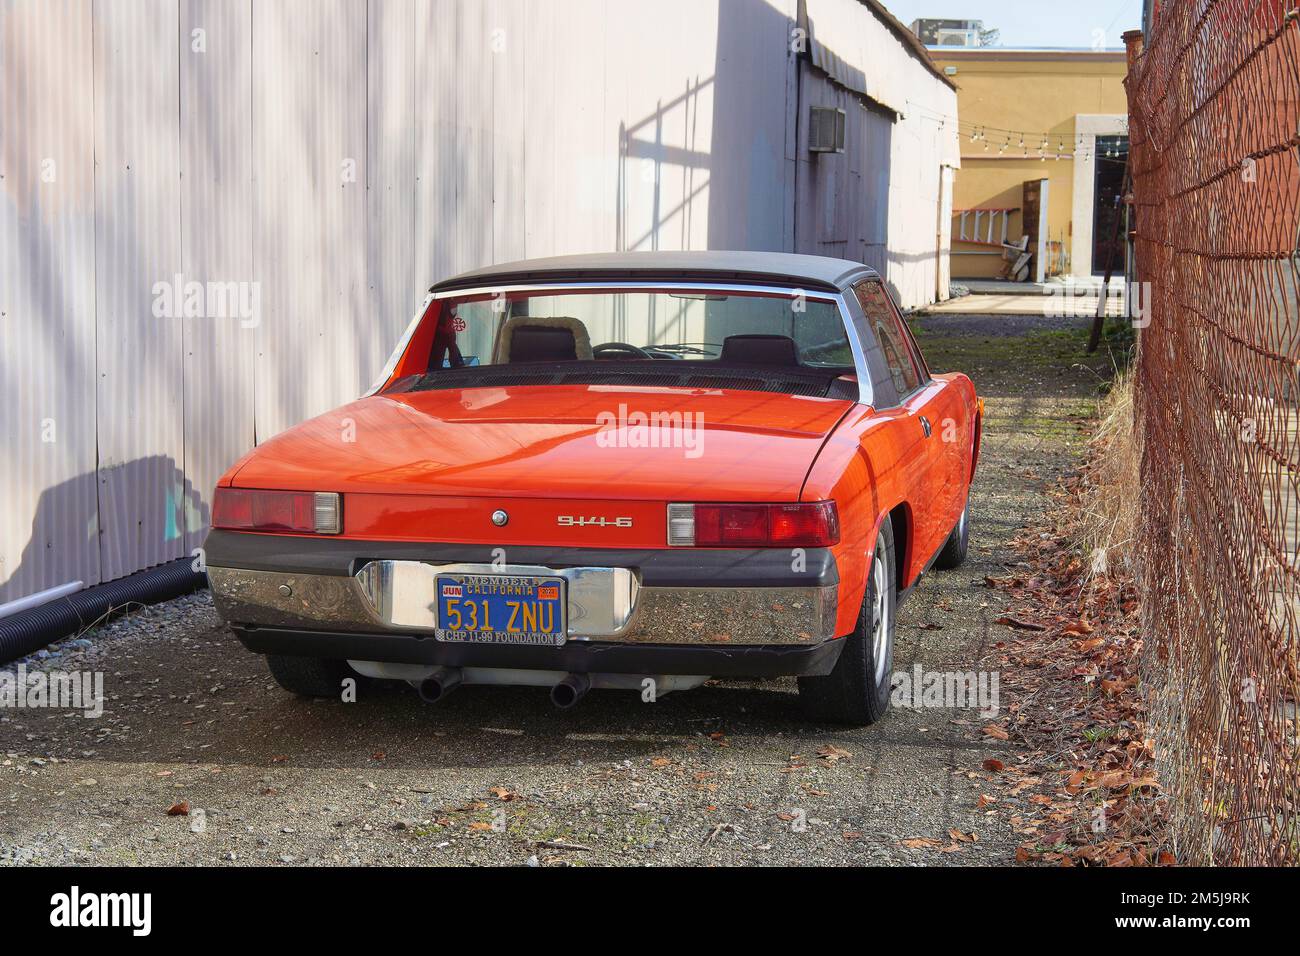 Vintage Porsche 914-6 classic car rear view with red paint parked in an alley in Healdsburg, Sonoma County, California. Stock Photo